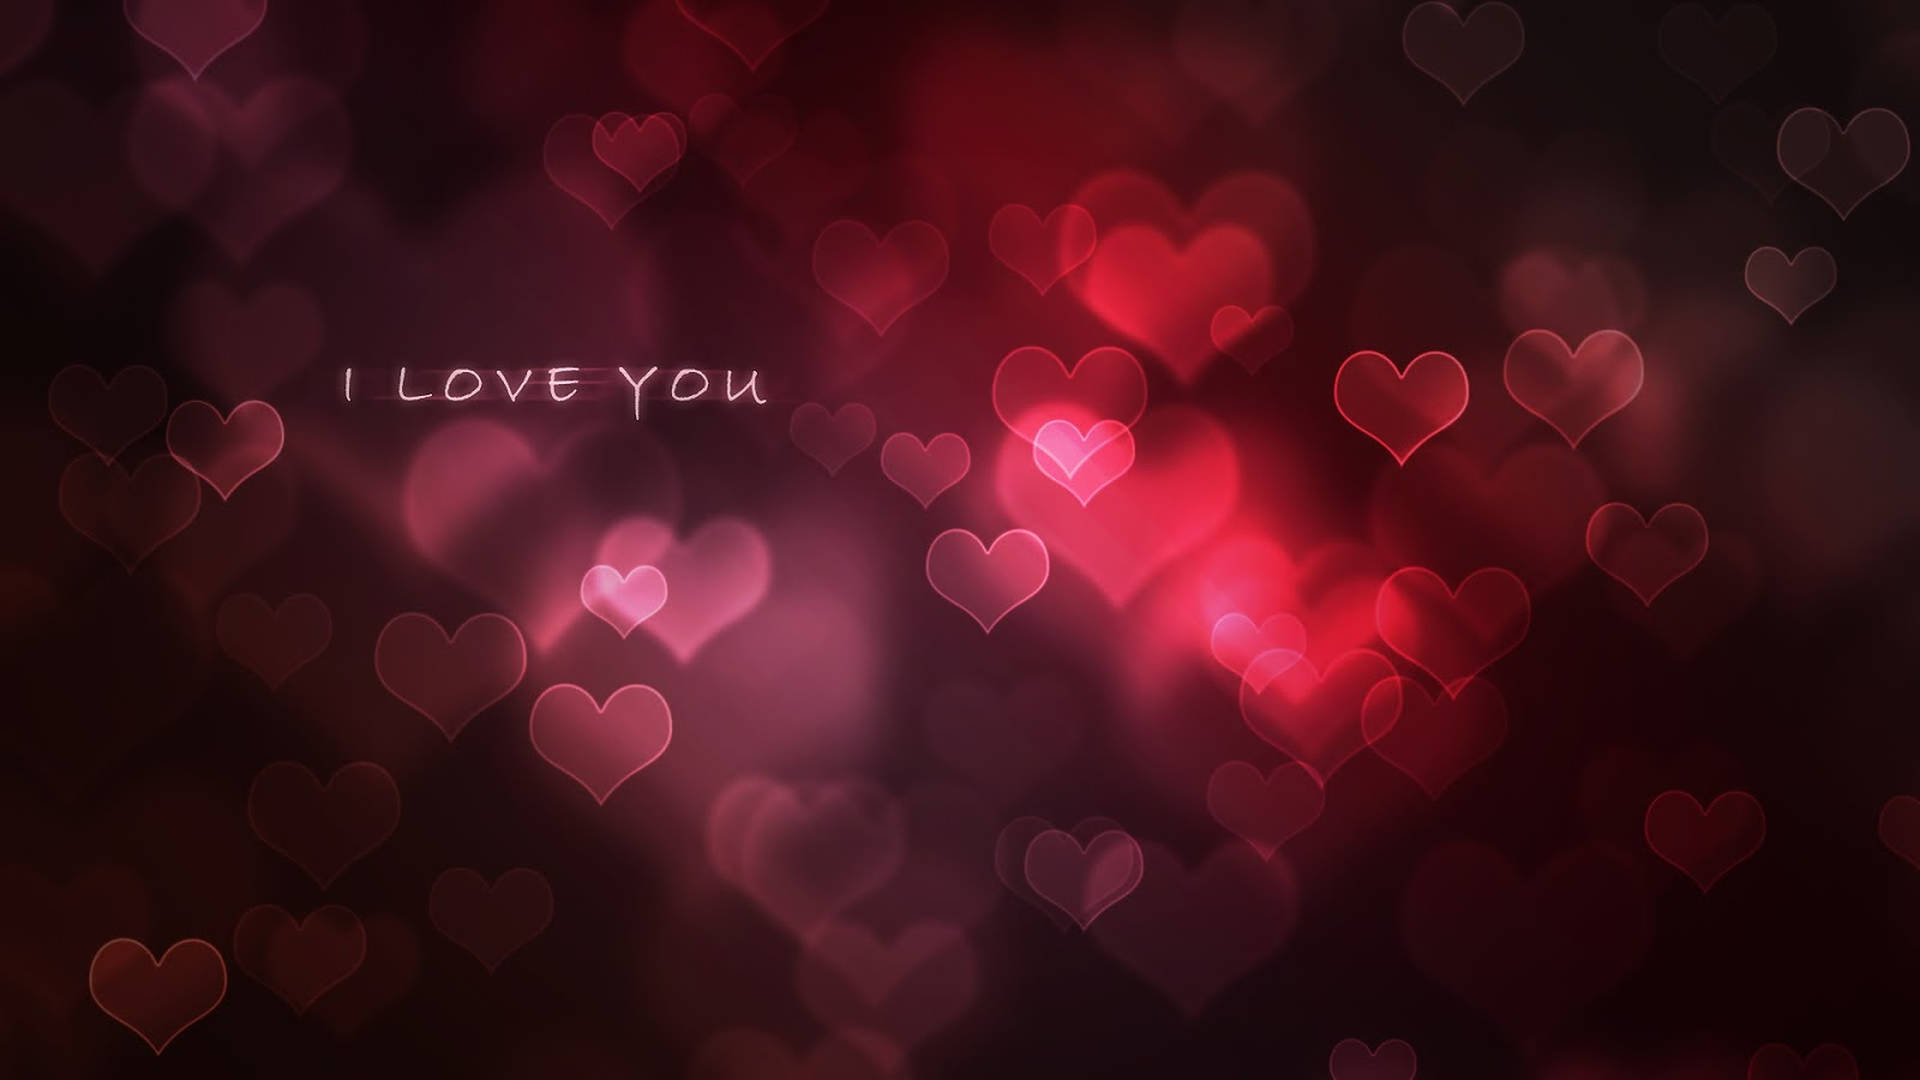 I Love You With Hearts Background